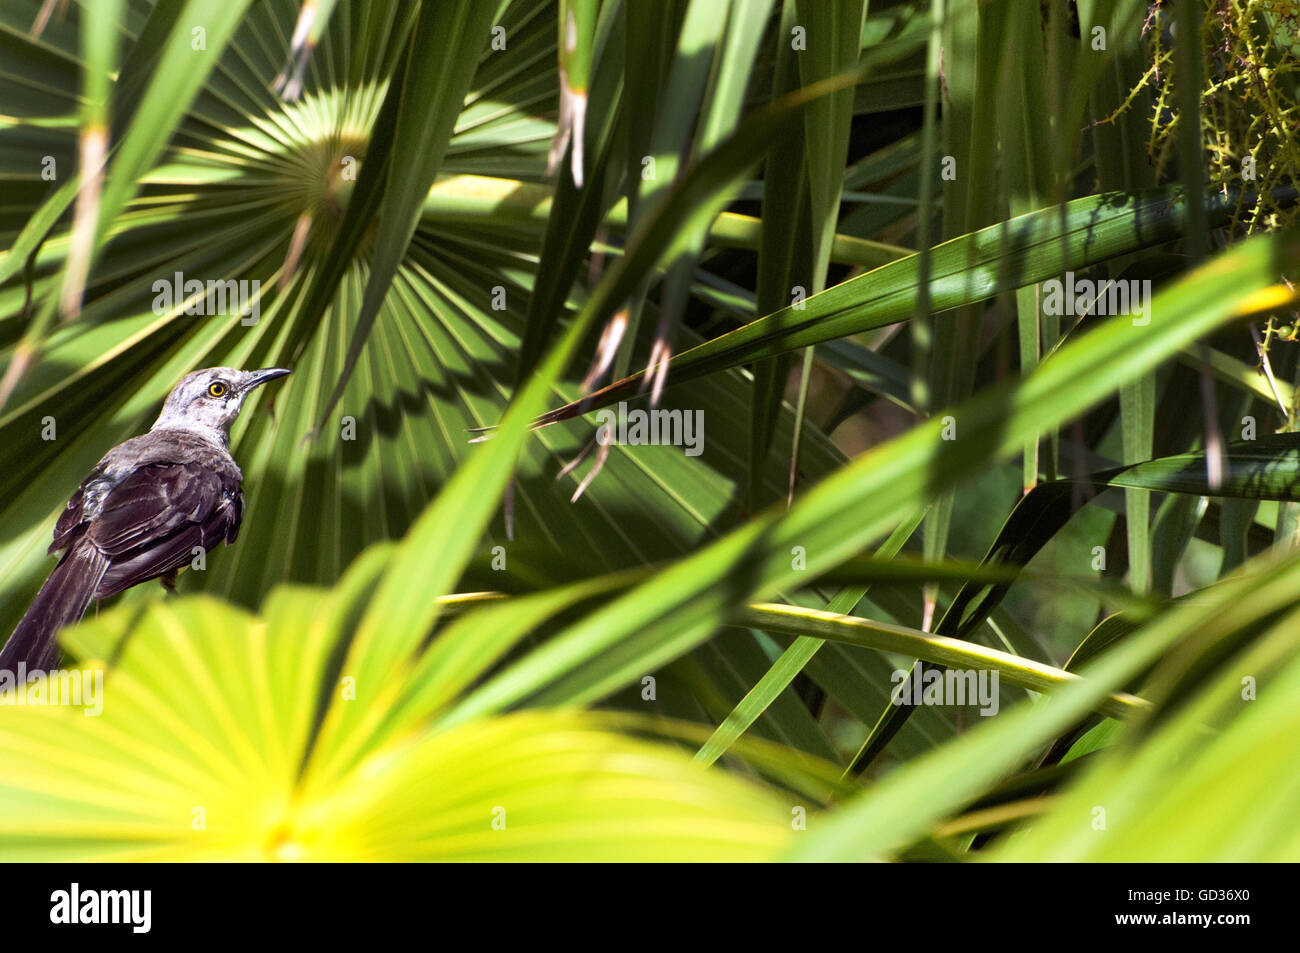 Beautiful Small Brown Bird Perched in Lush Tropical Sunny Green and Yellow Plants with Detailed Shadows in Mexico Stock Photo